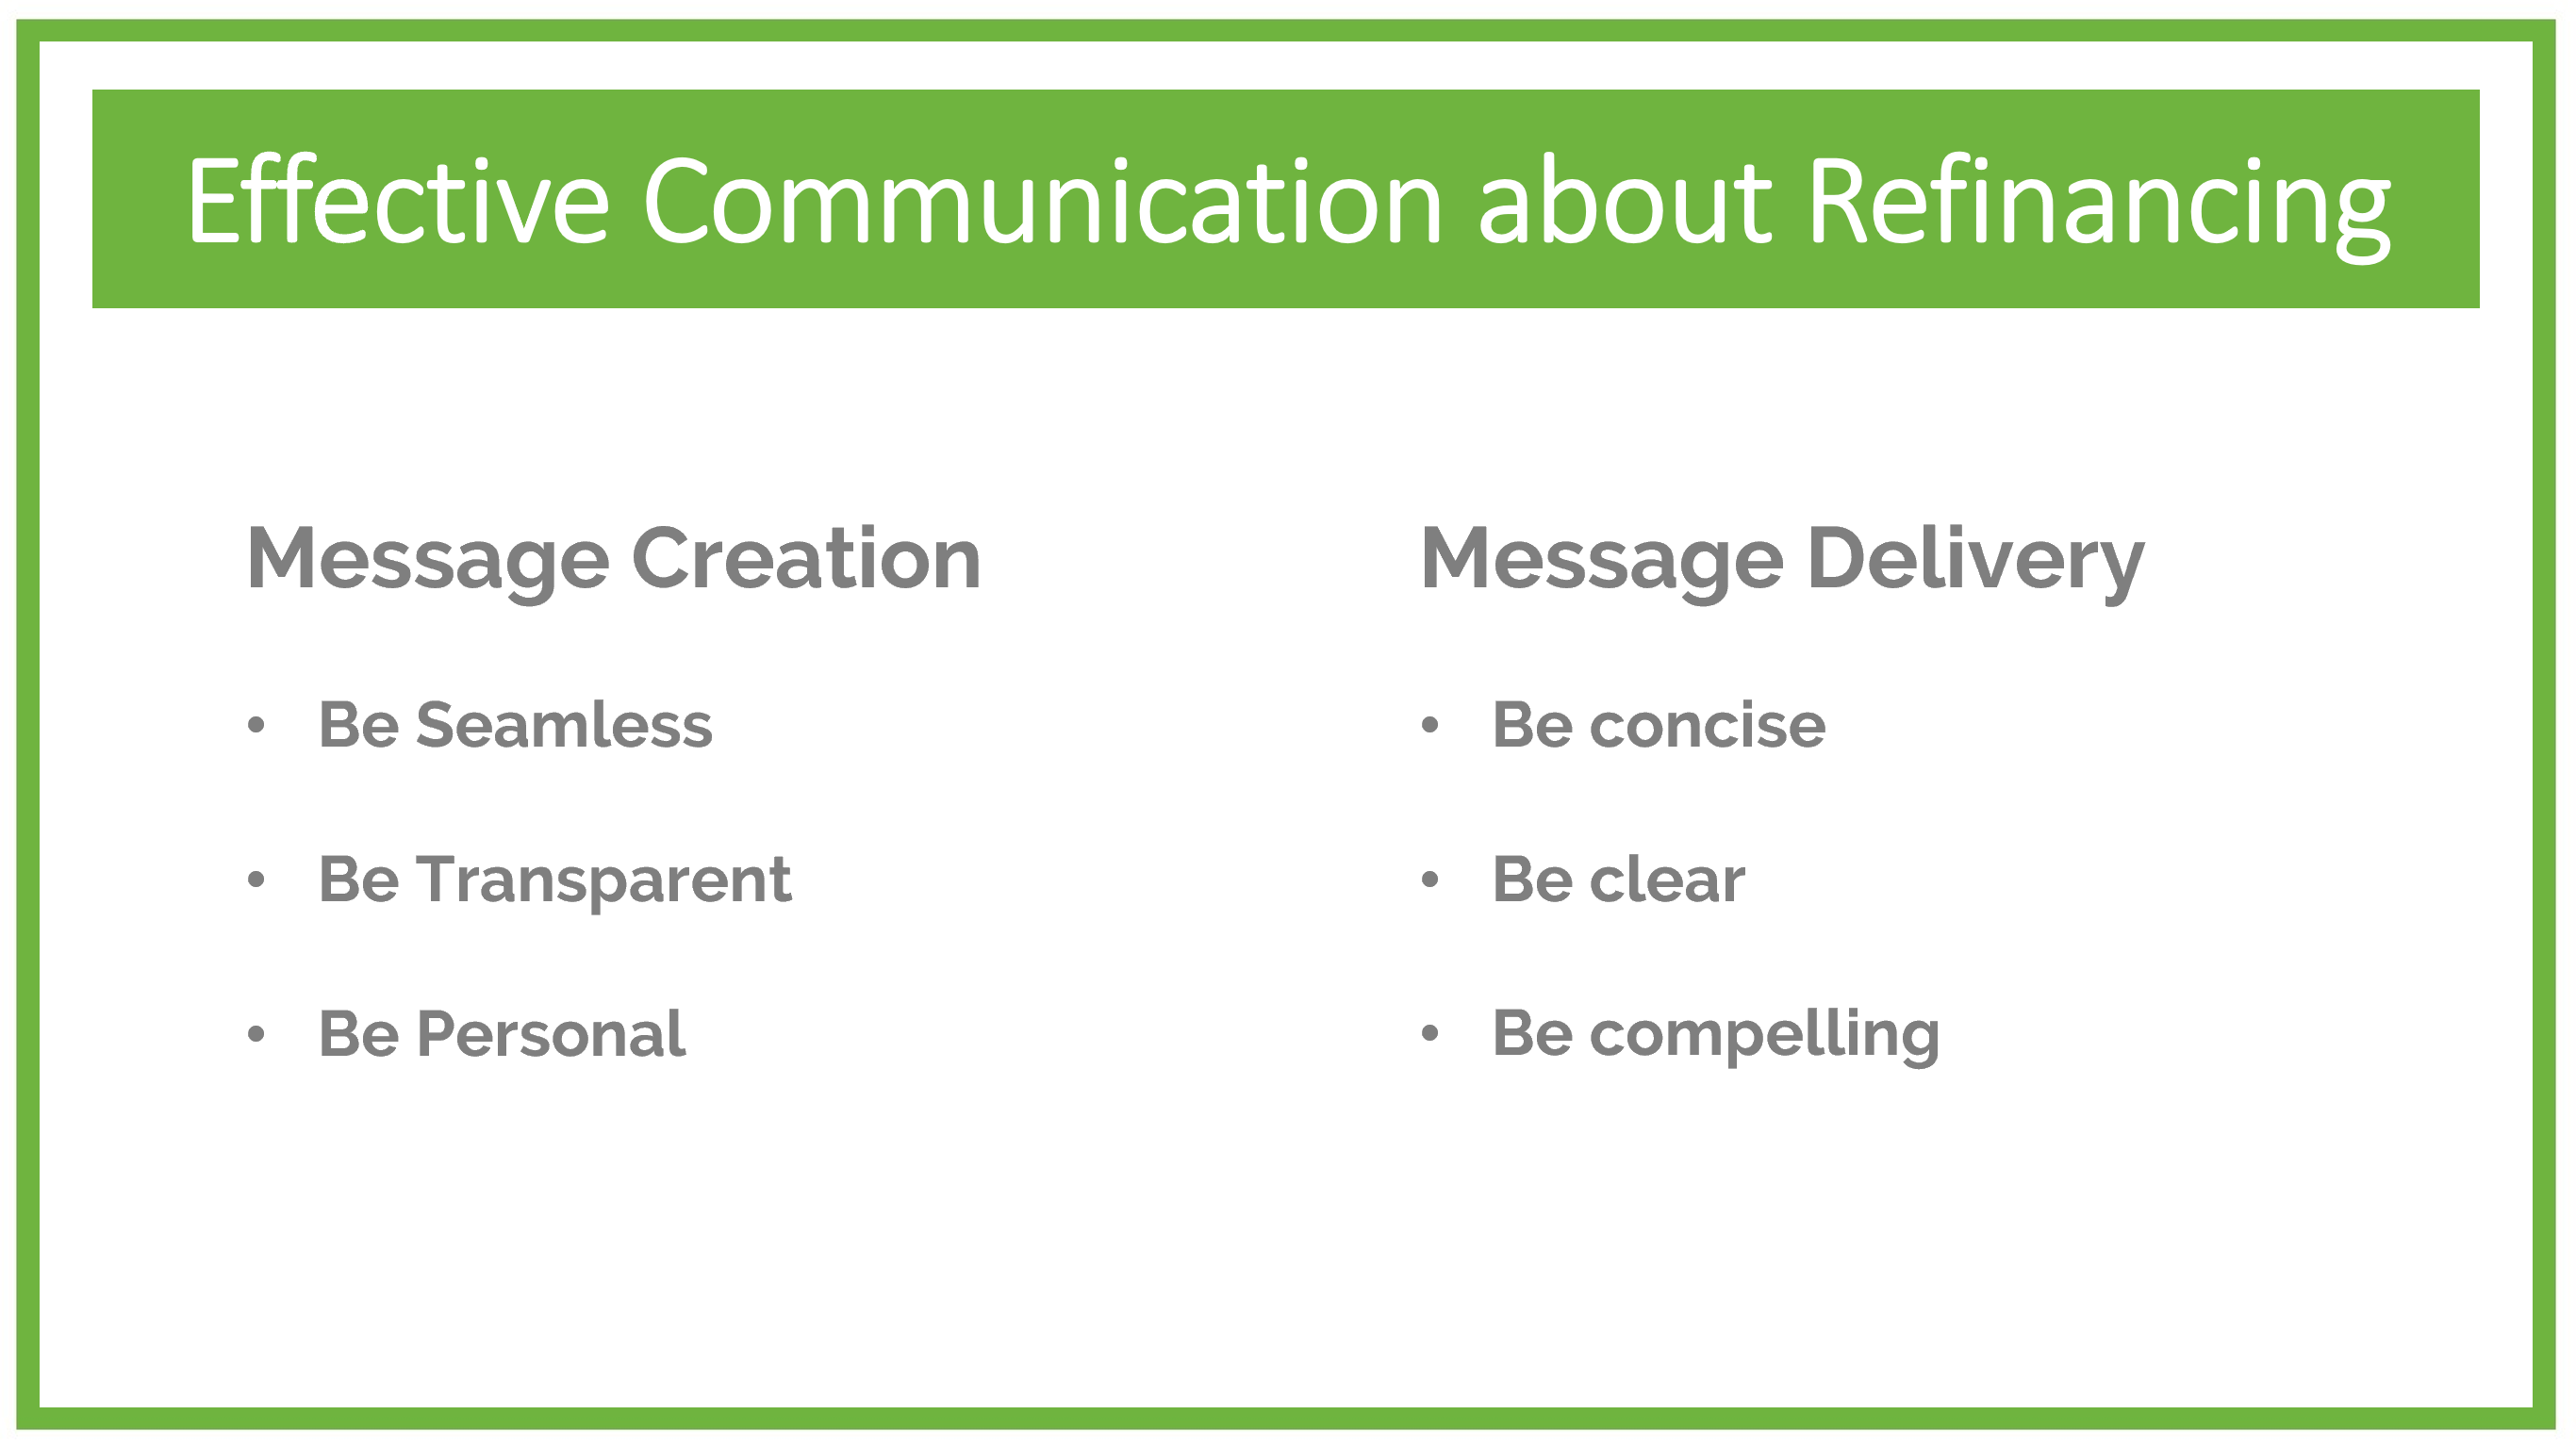 Keys to Effective Communication about Refinancing